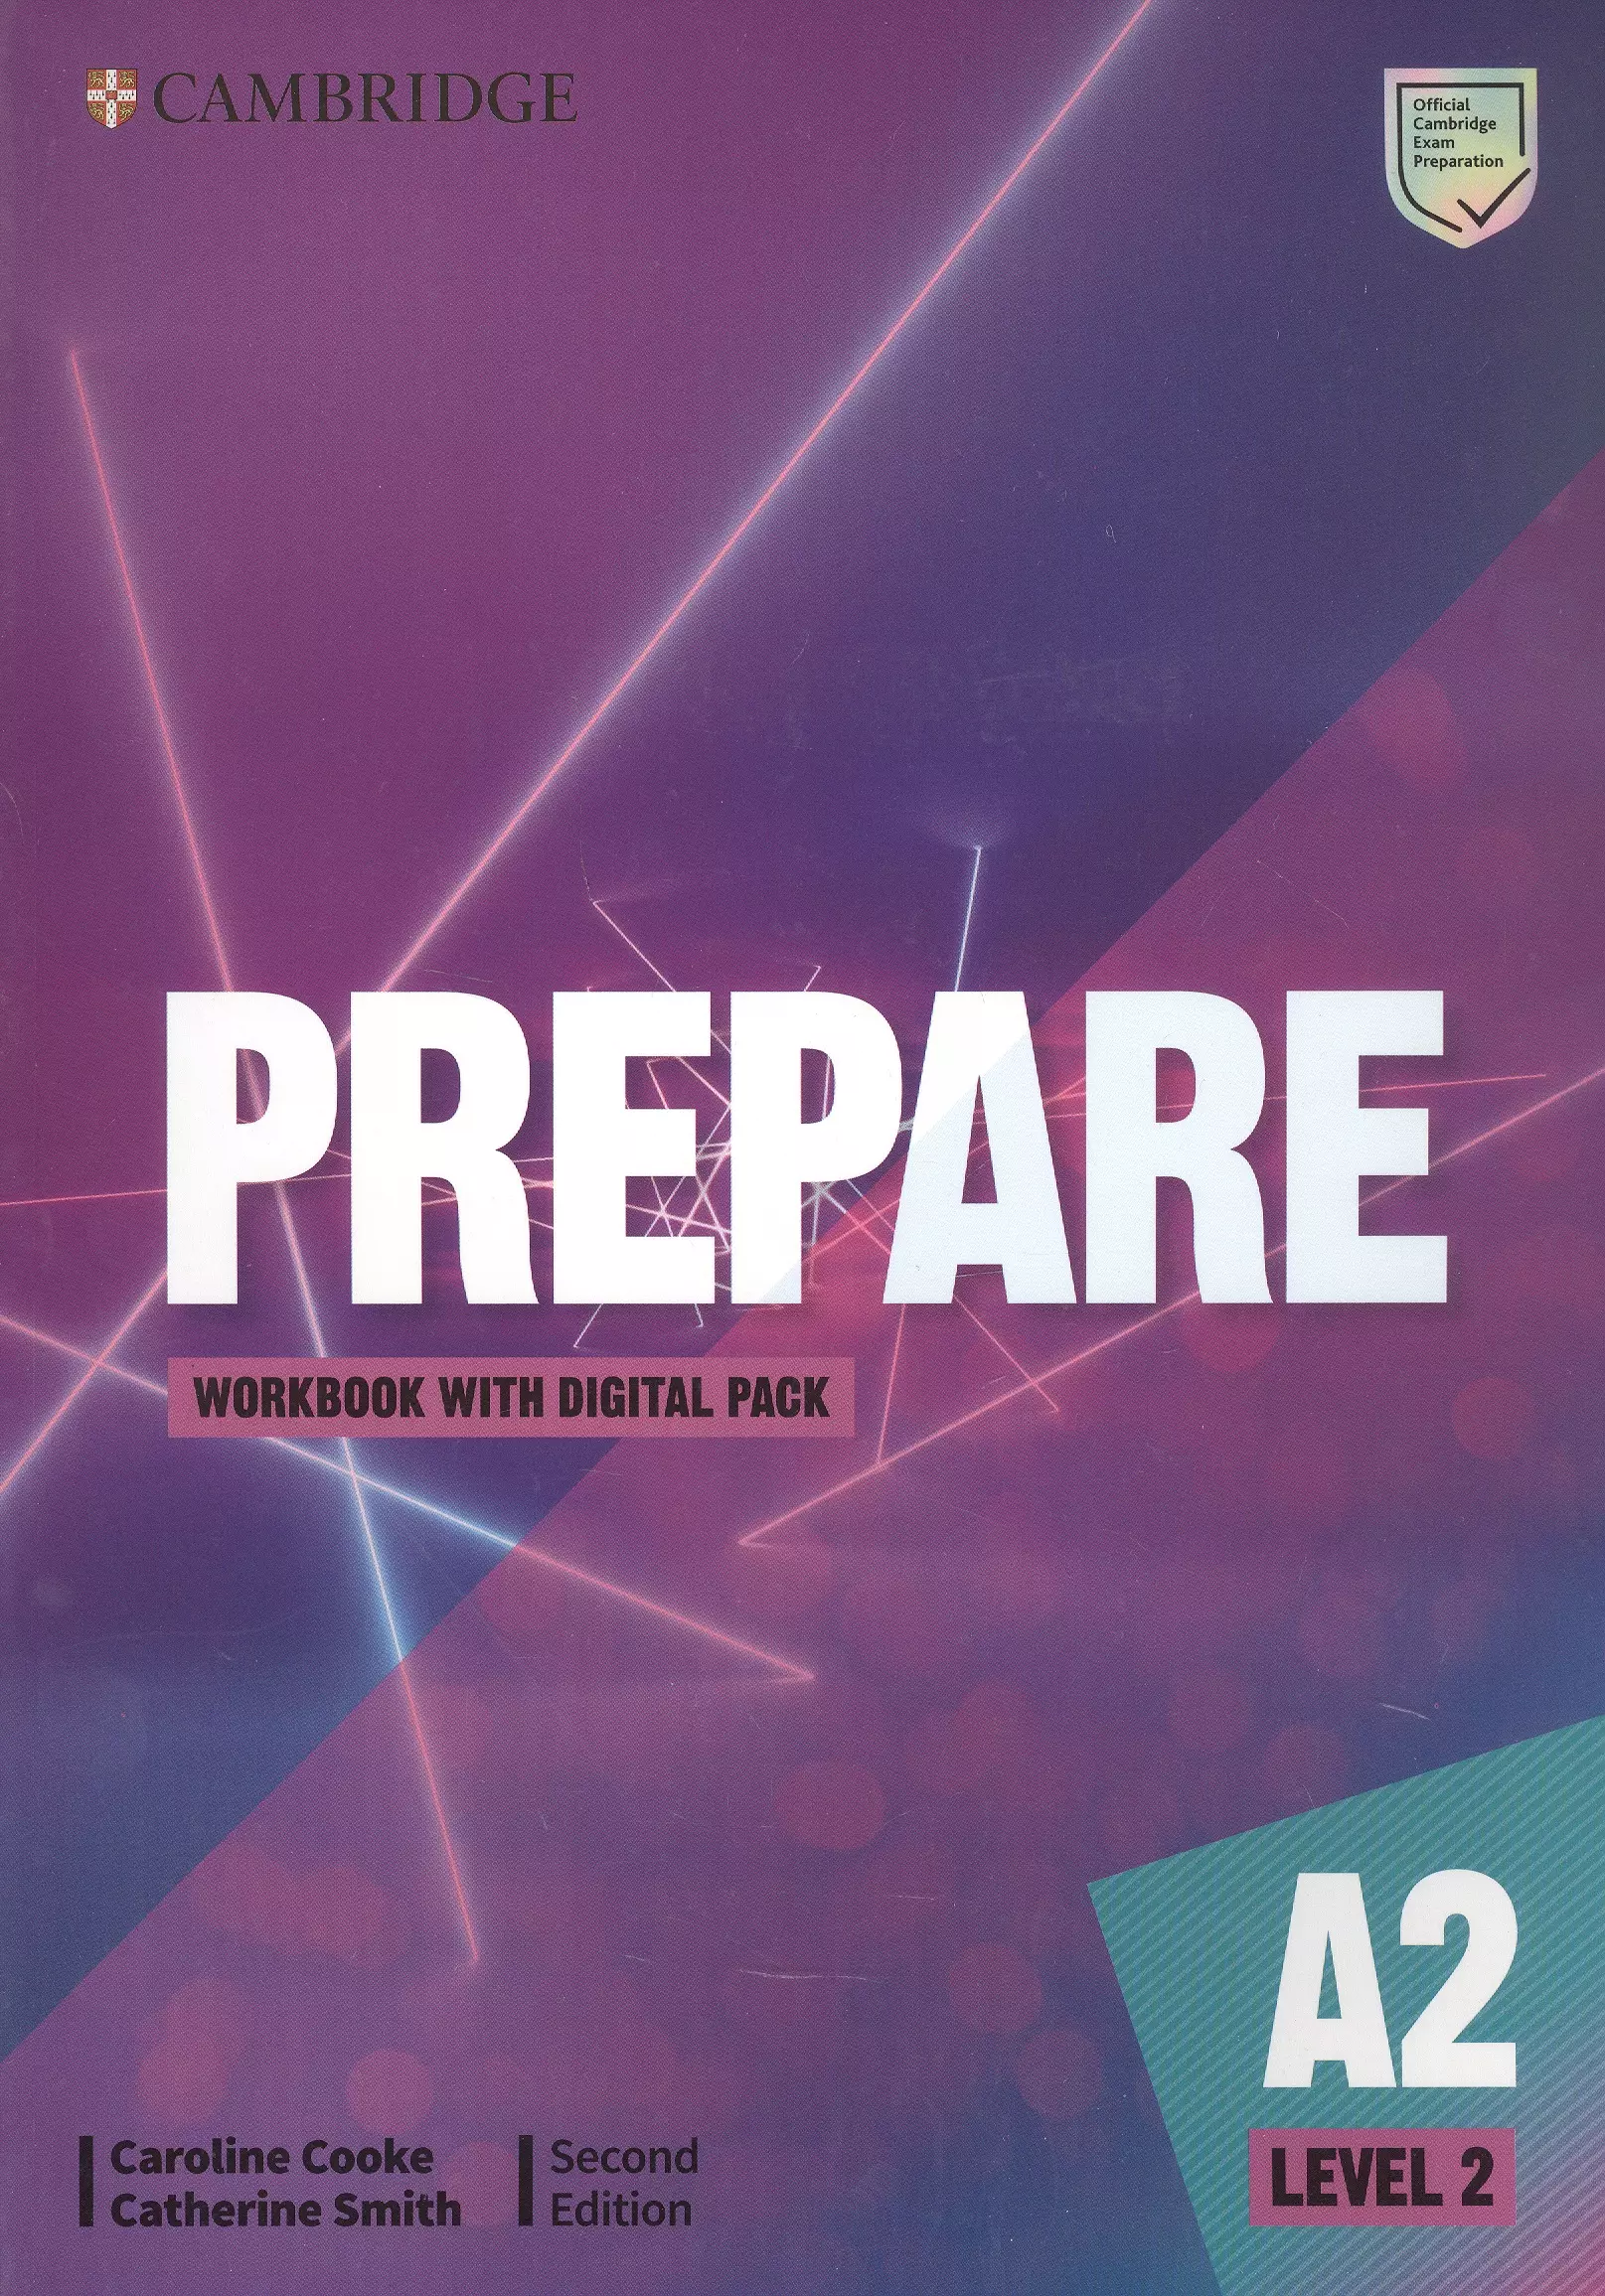 Cooke Caroline, Smith Catherine - Prepare. A2. Level 2. Workbook with Digital Pack. Second Edition